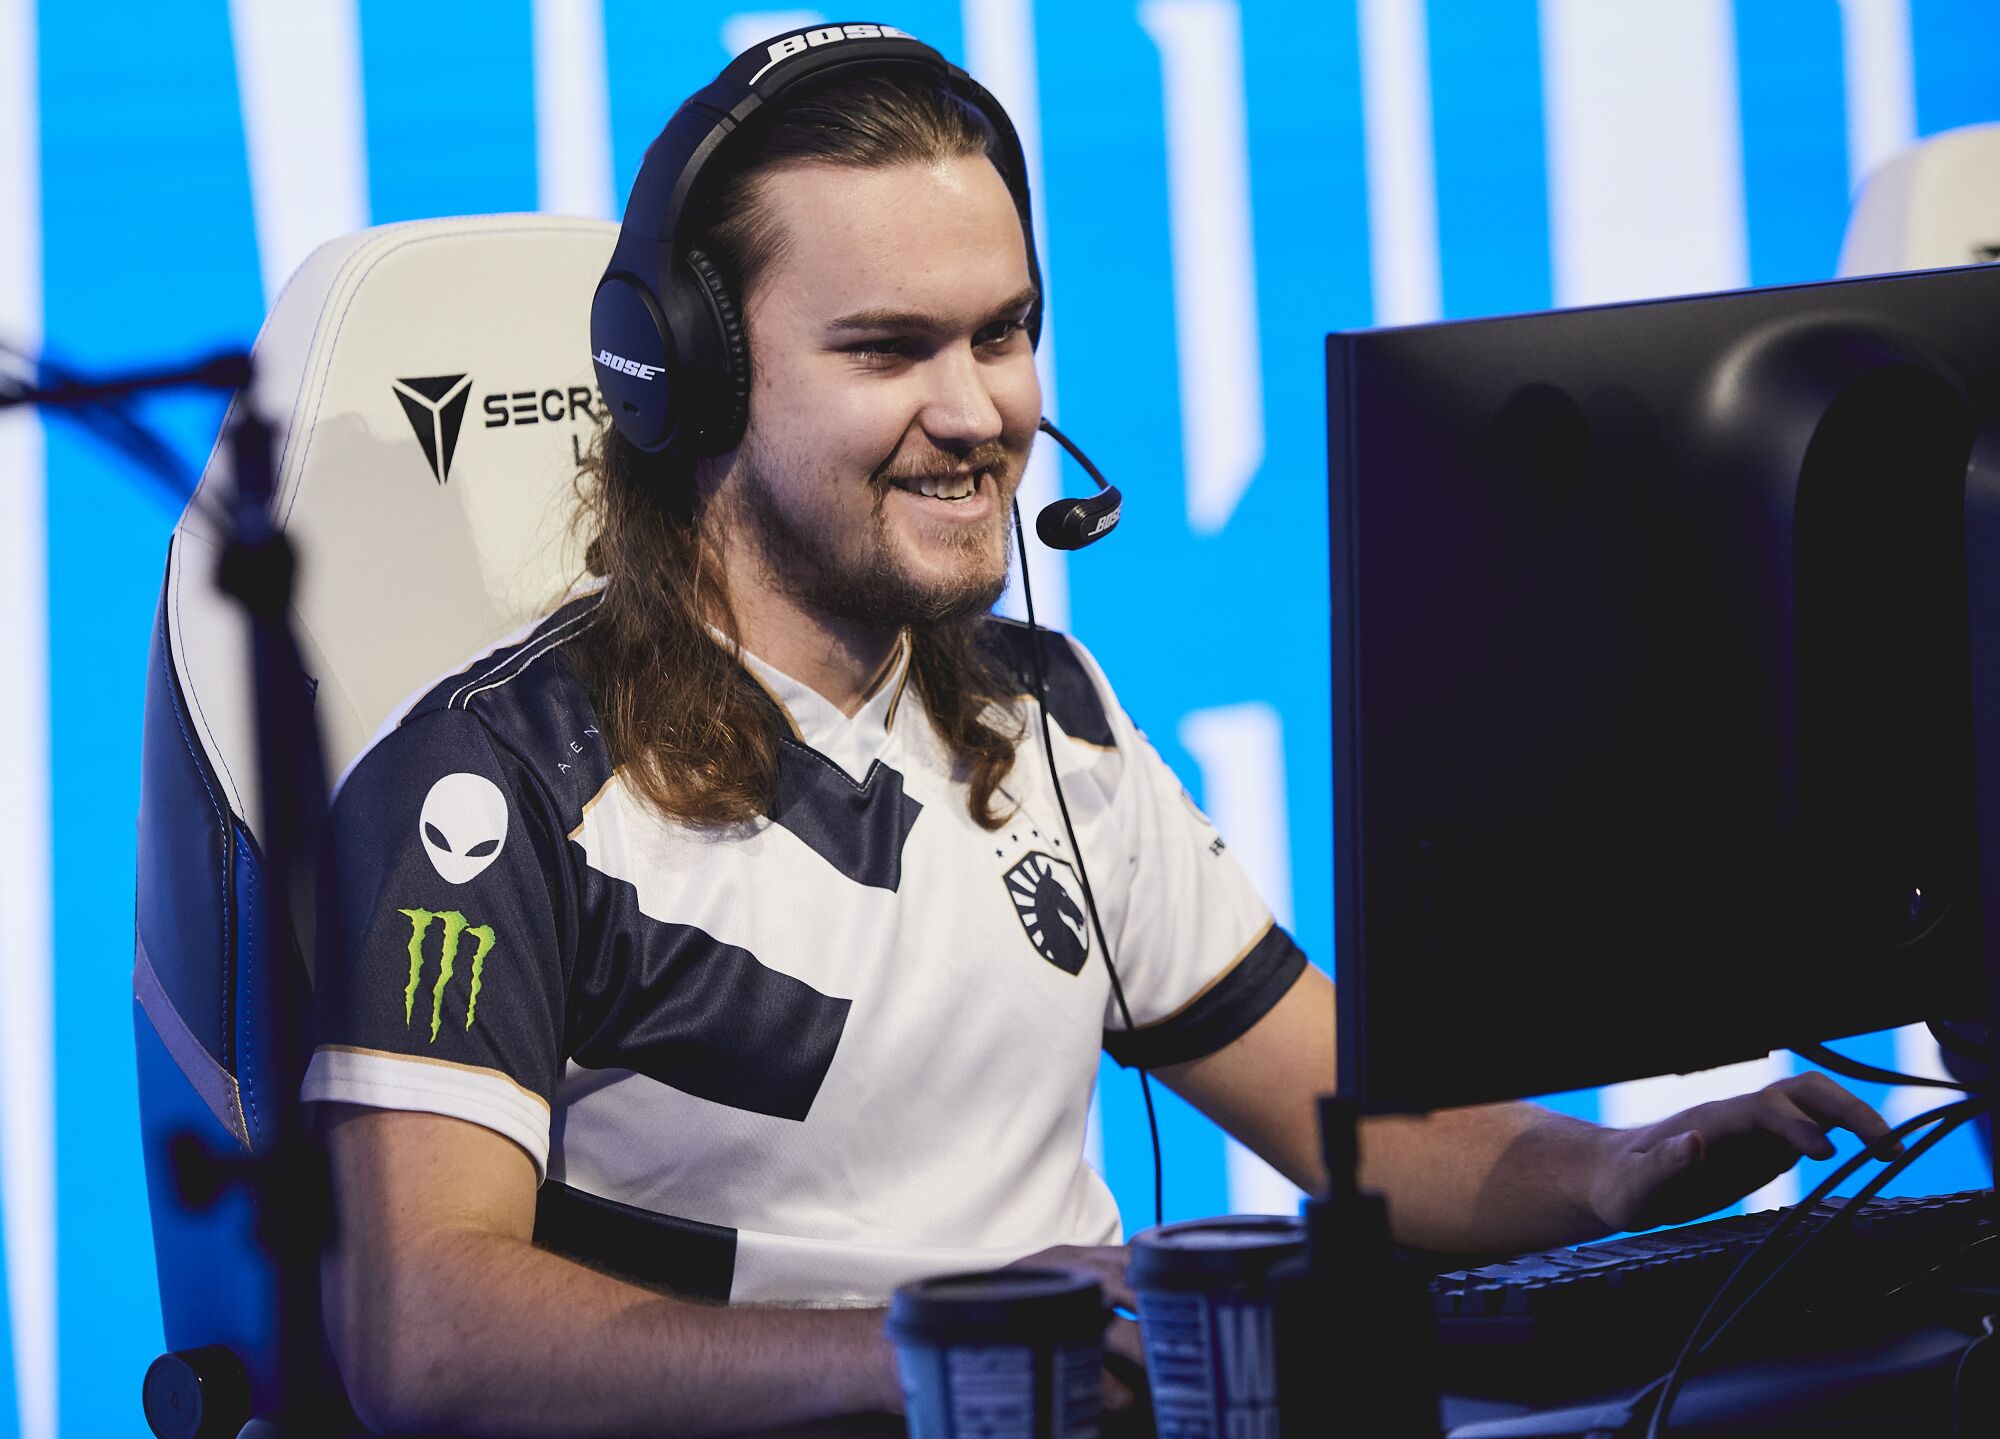 Team Liquid's Lucas “Santorin” Larsen competes at the League of Legends World Championship Groups Stage